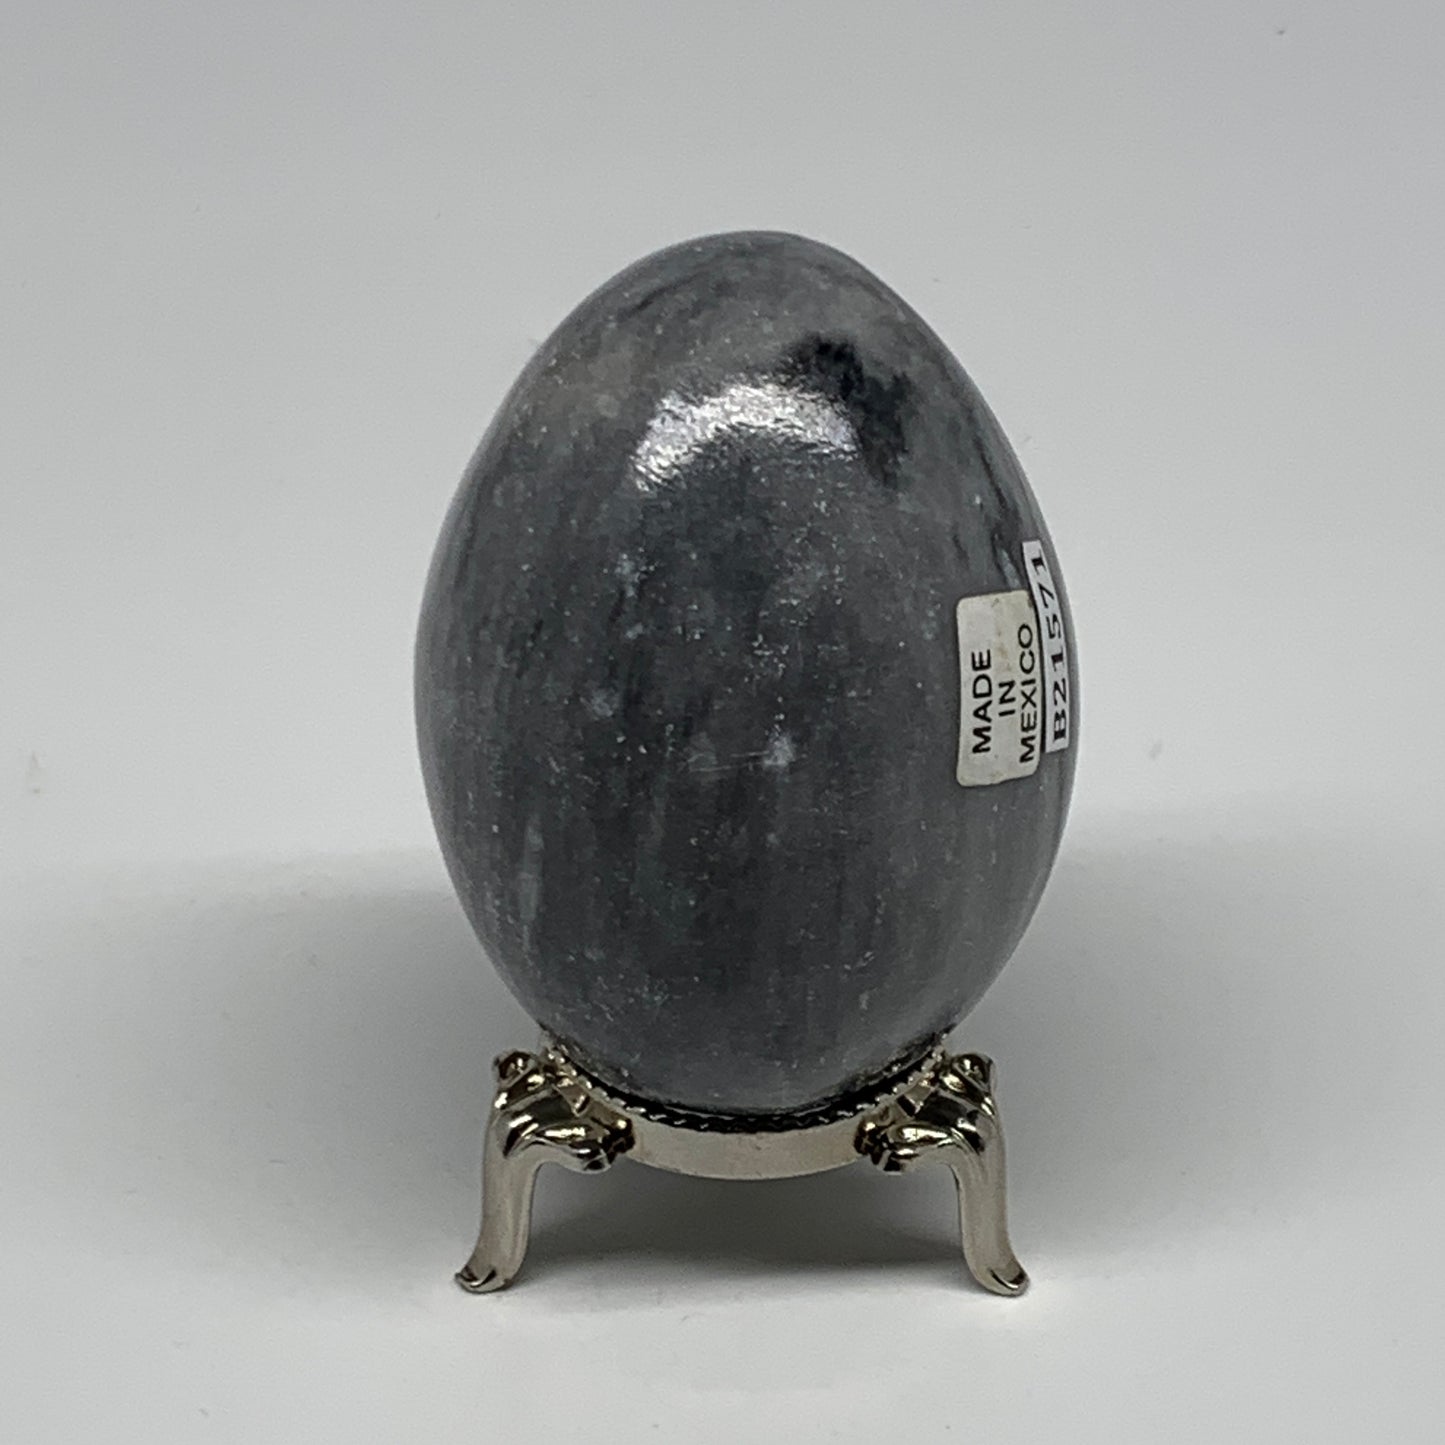 216g, 2.6"x1.9" Natural Gray Onyx Egg Gemstone Mineral, from Mexico, B21571